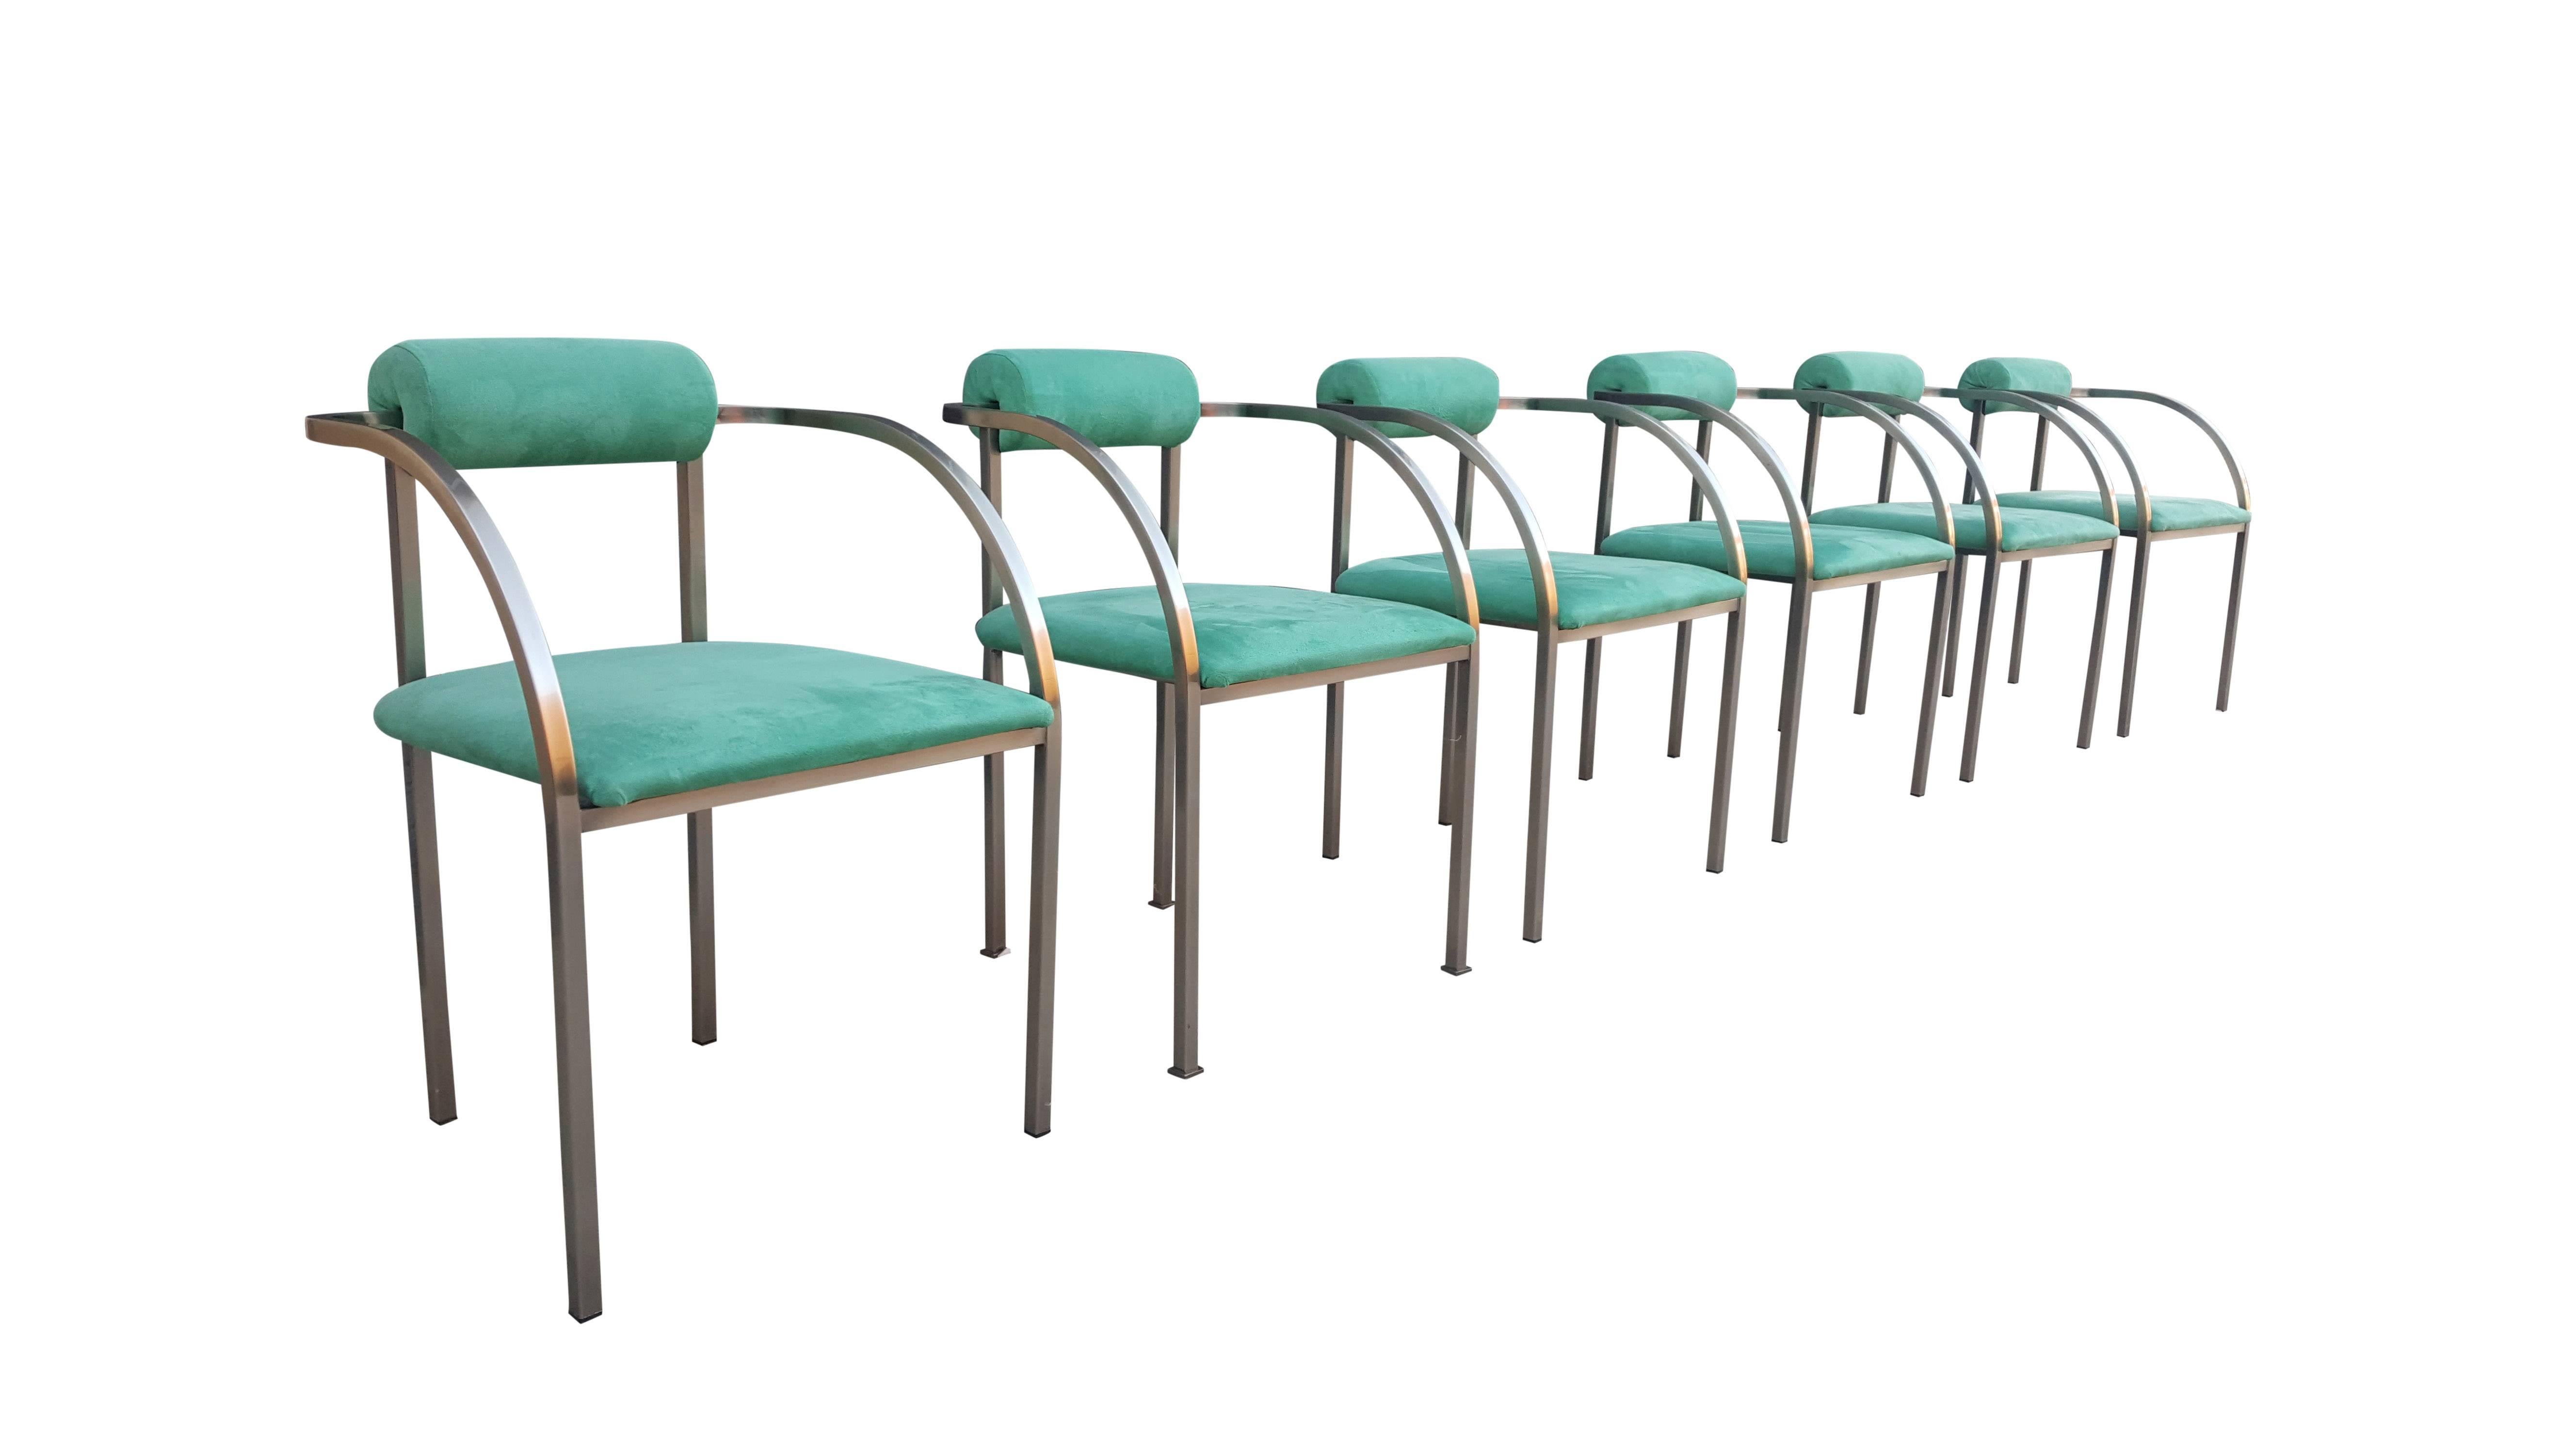 Set of six Belgo Chrome chairs in stainless steel en velvet green color.
Produced in Belgium.
The chairs are in a very good condition.